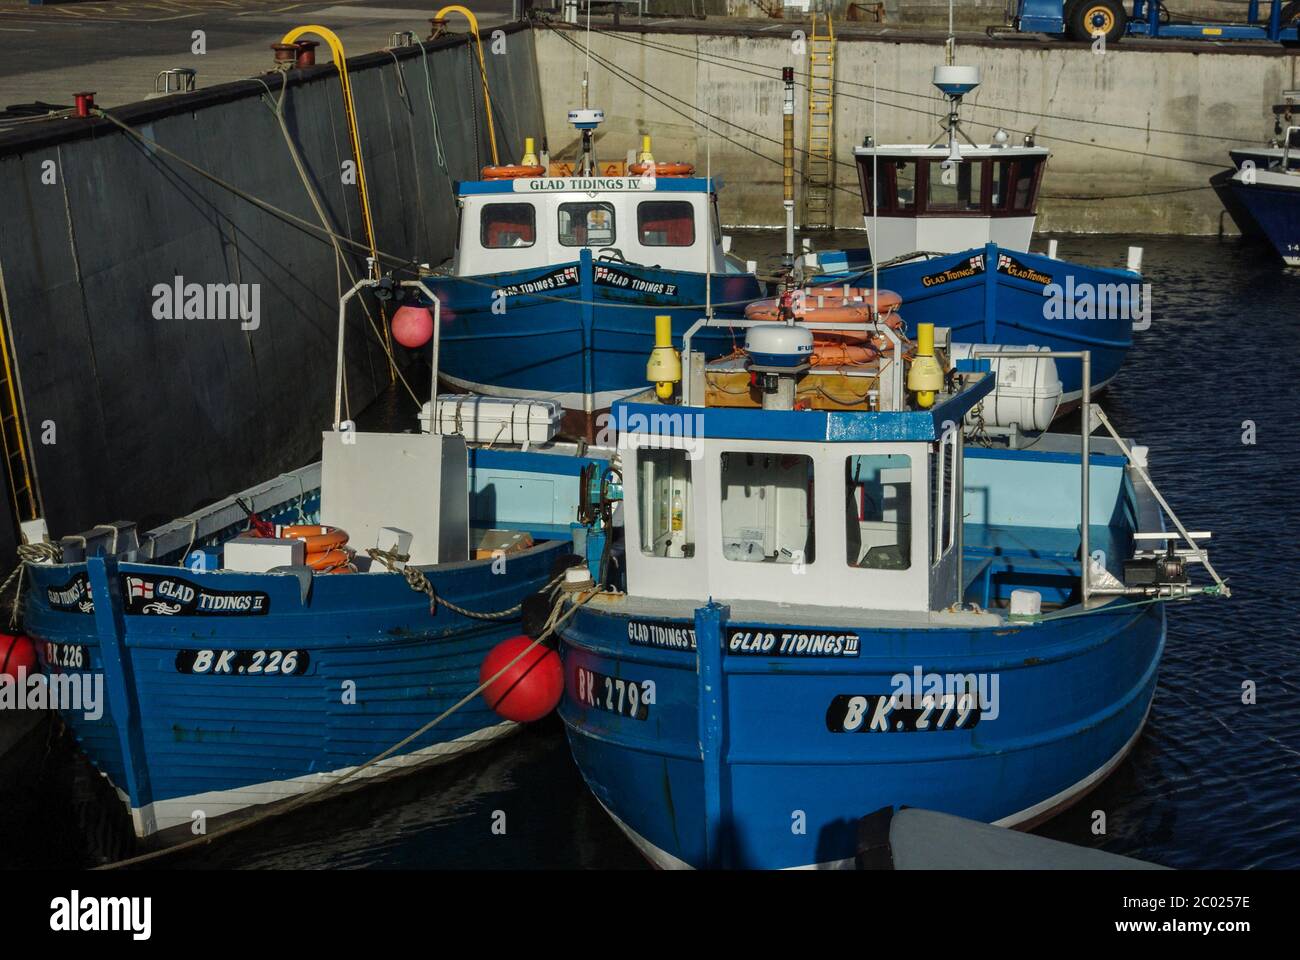 Seahouses Harbour, Northumberland, UK; Glad Tidings, Farne Islands excursion boats moored up. Stock Photo